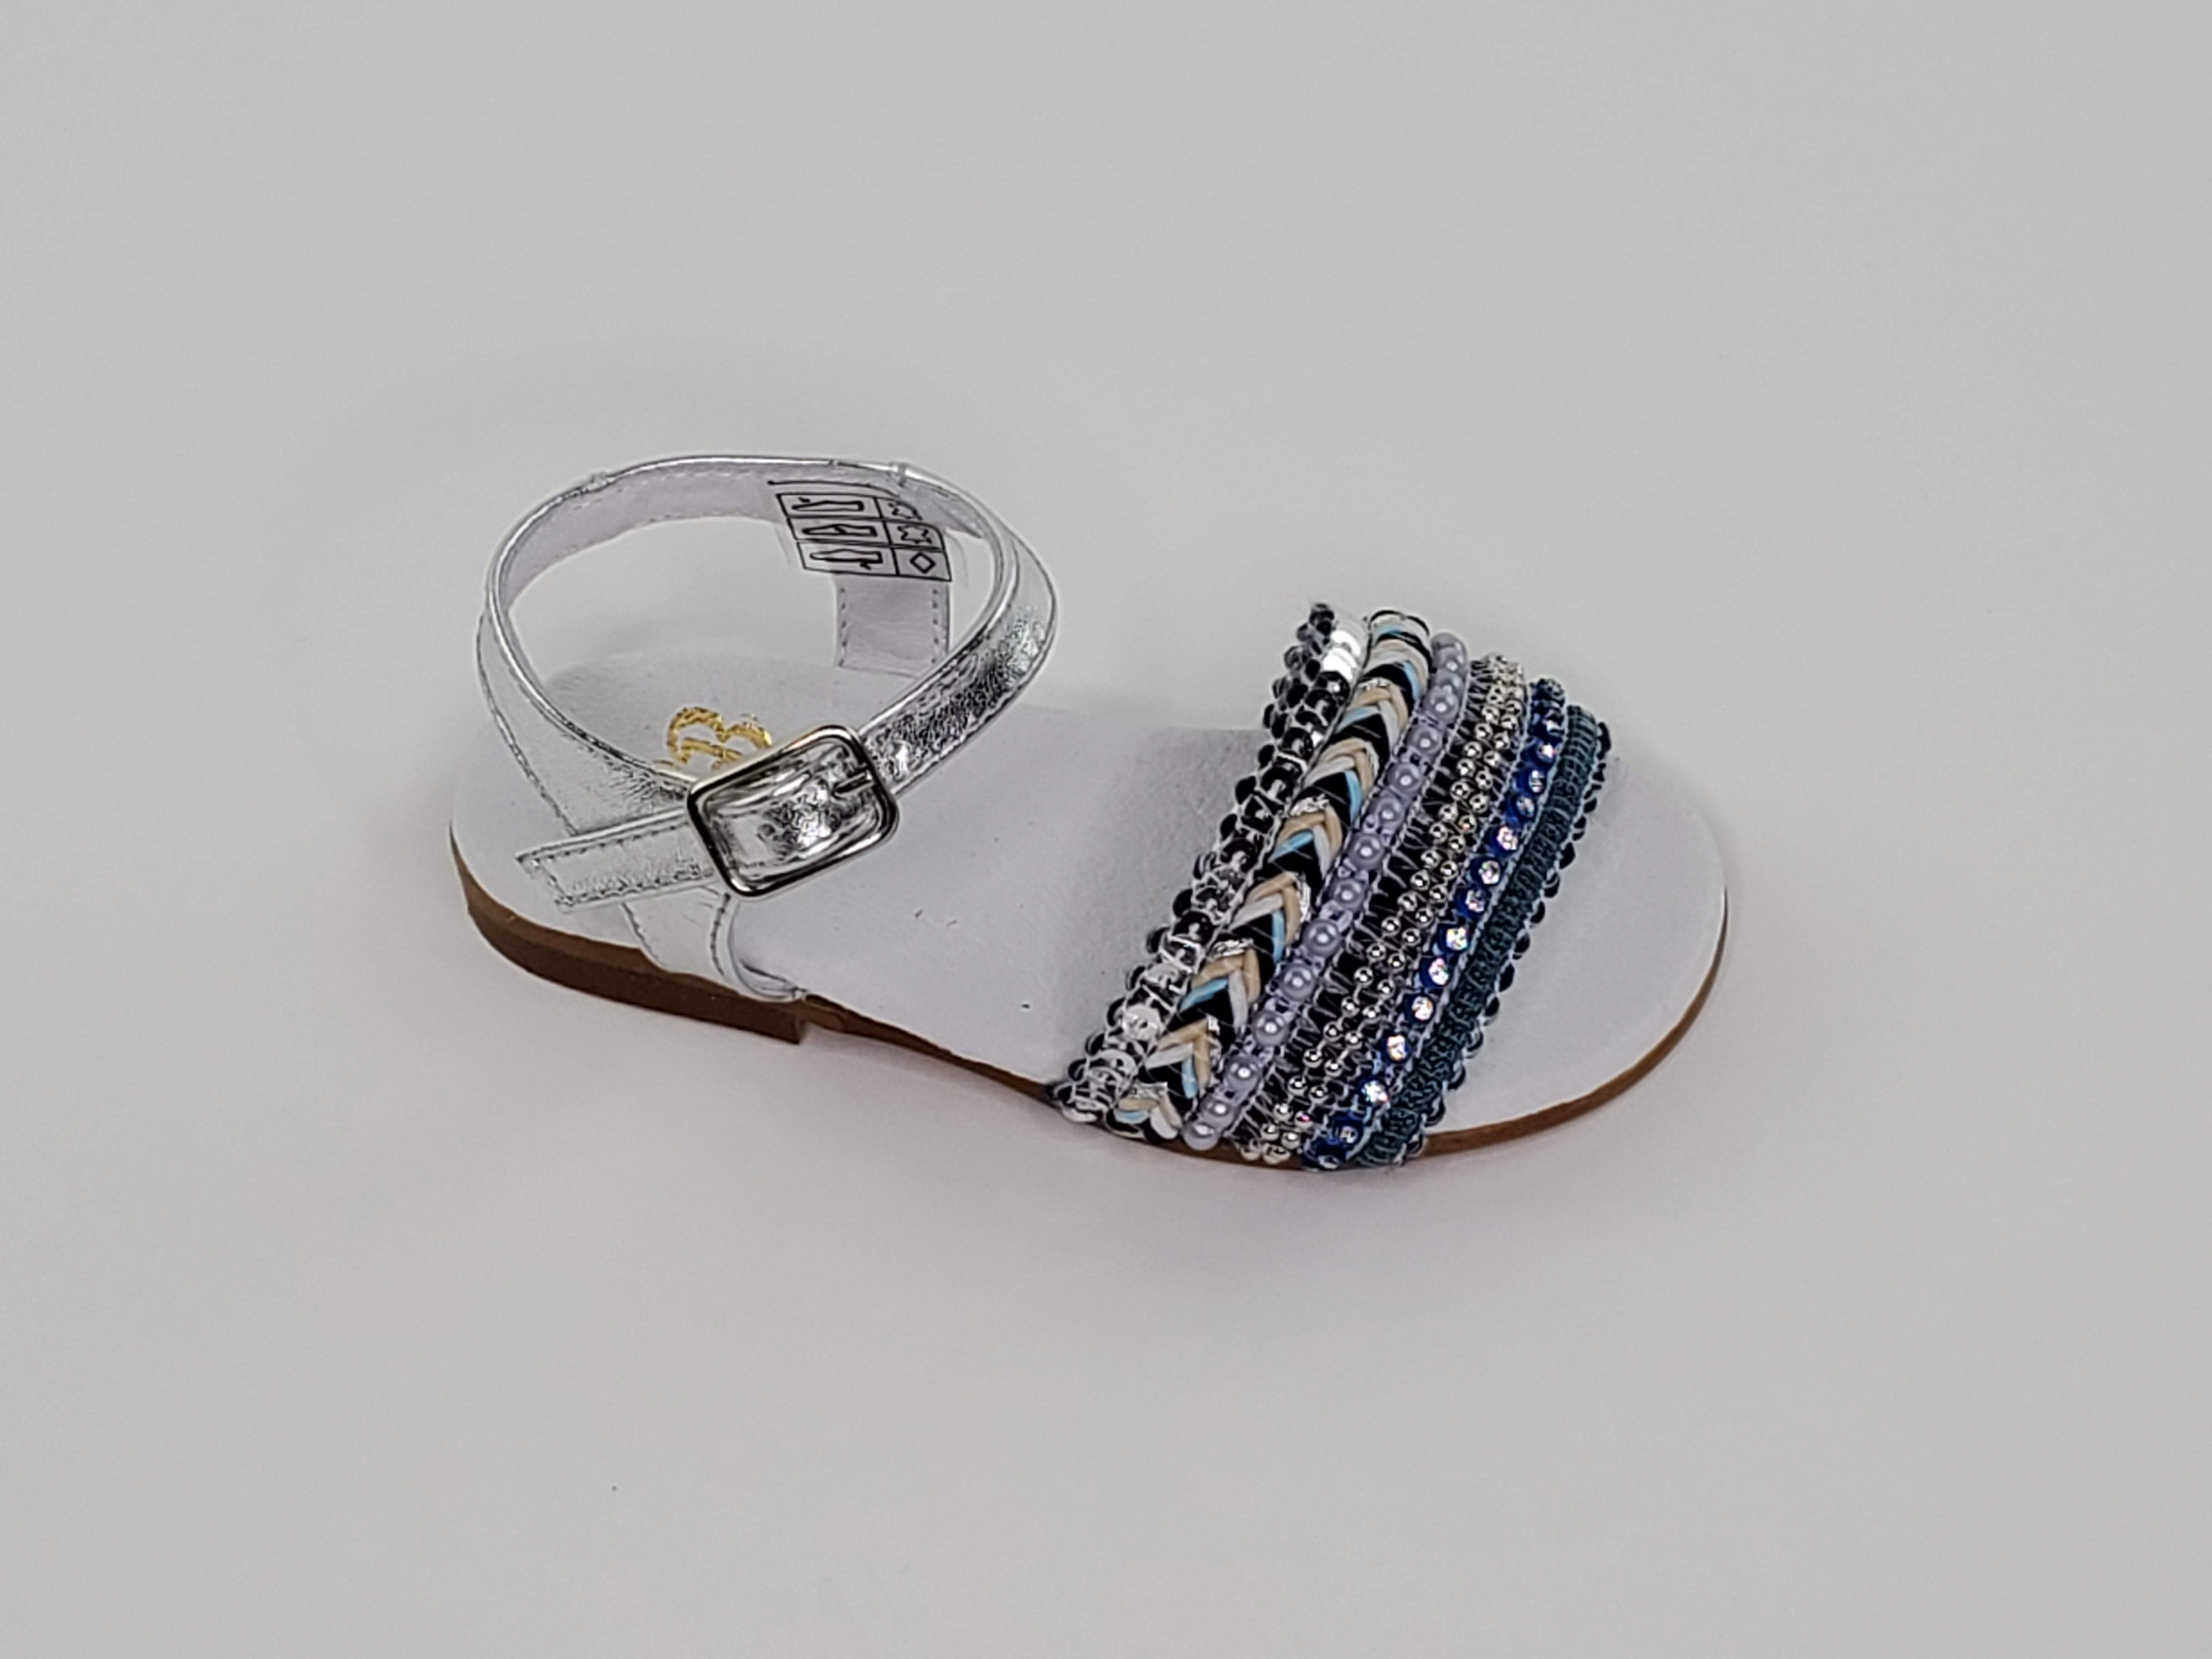 Metalic Silver and Blue Beaded Sequins Sandals Girls Sandals Alfa Baby Boutique 